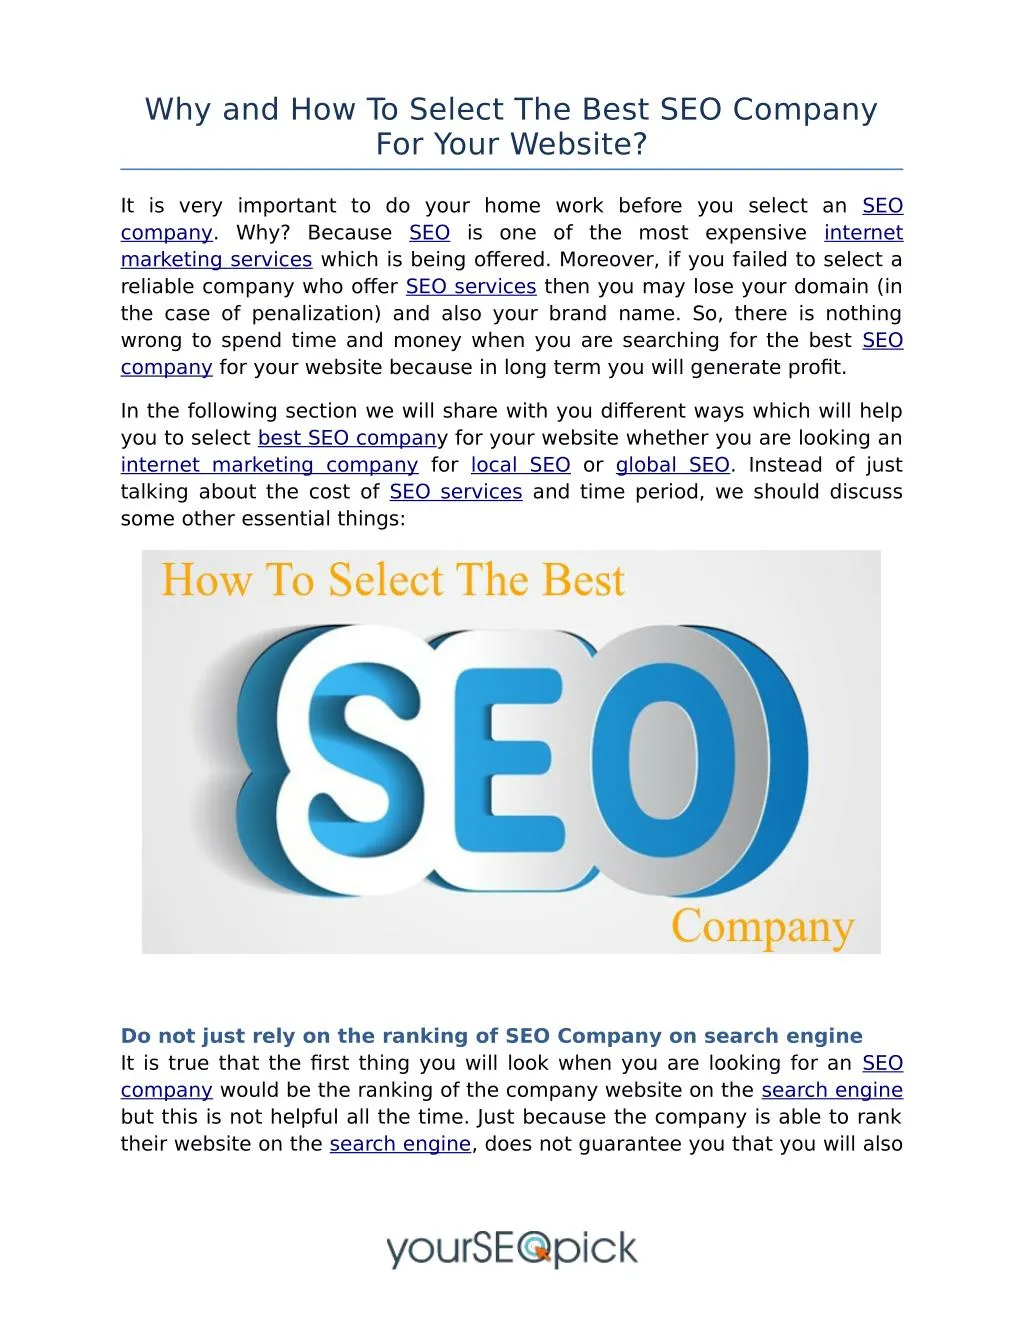 why and how to select the best seo company